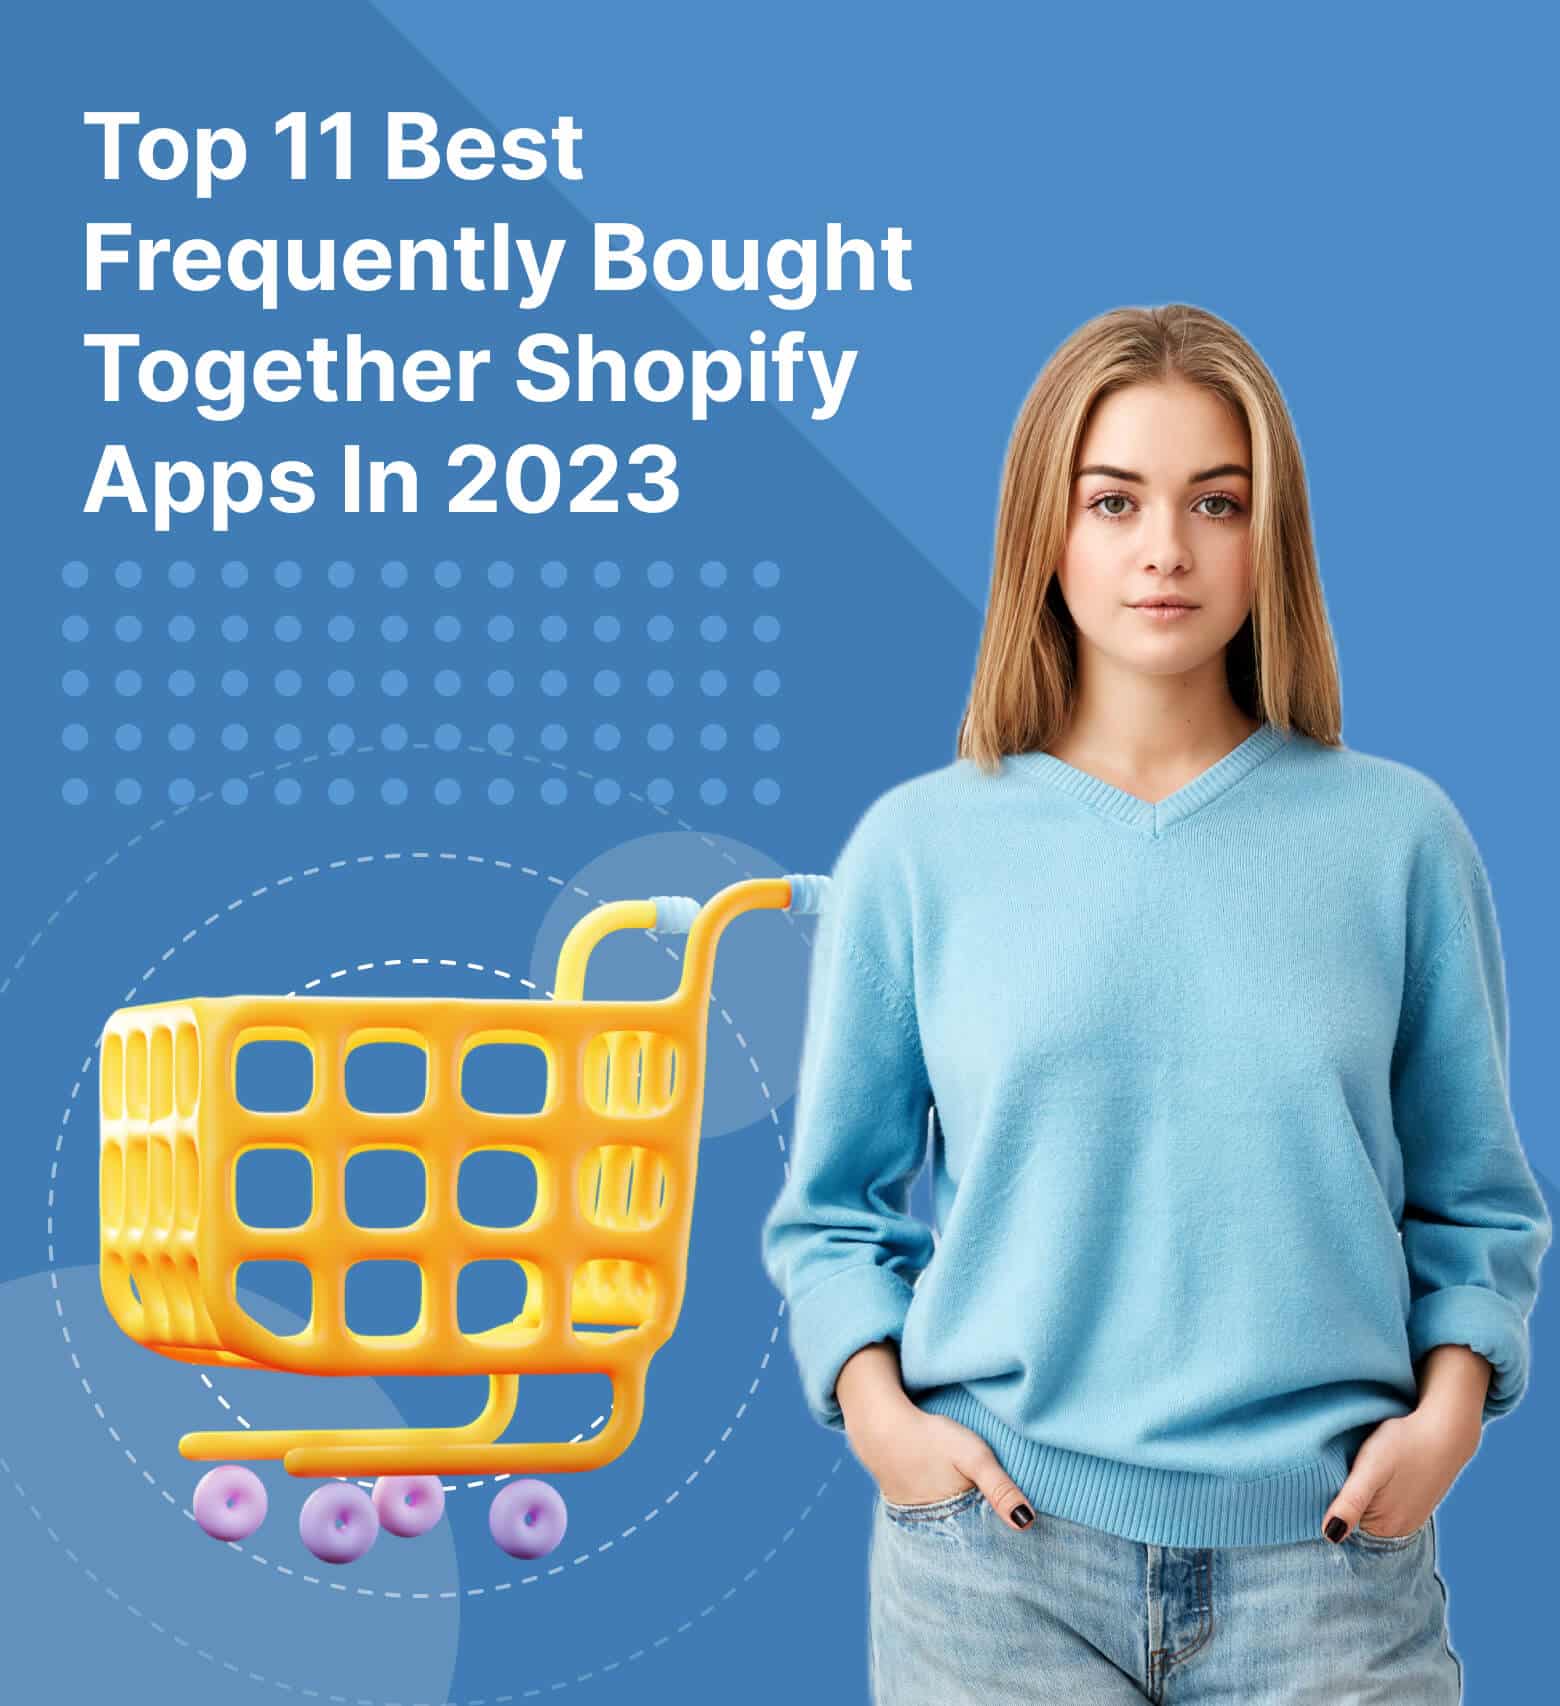 Best Frequently Bought Together Shopify Apps